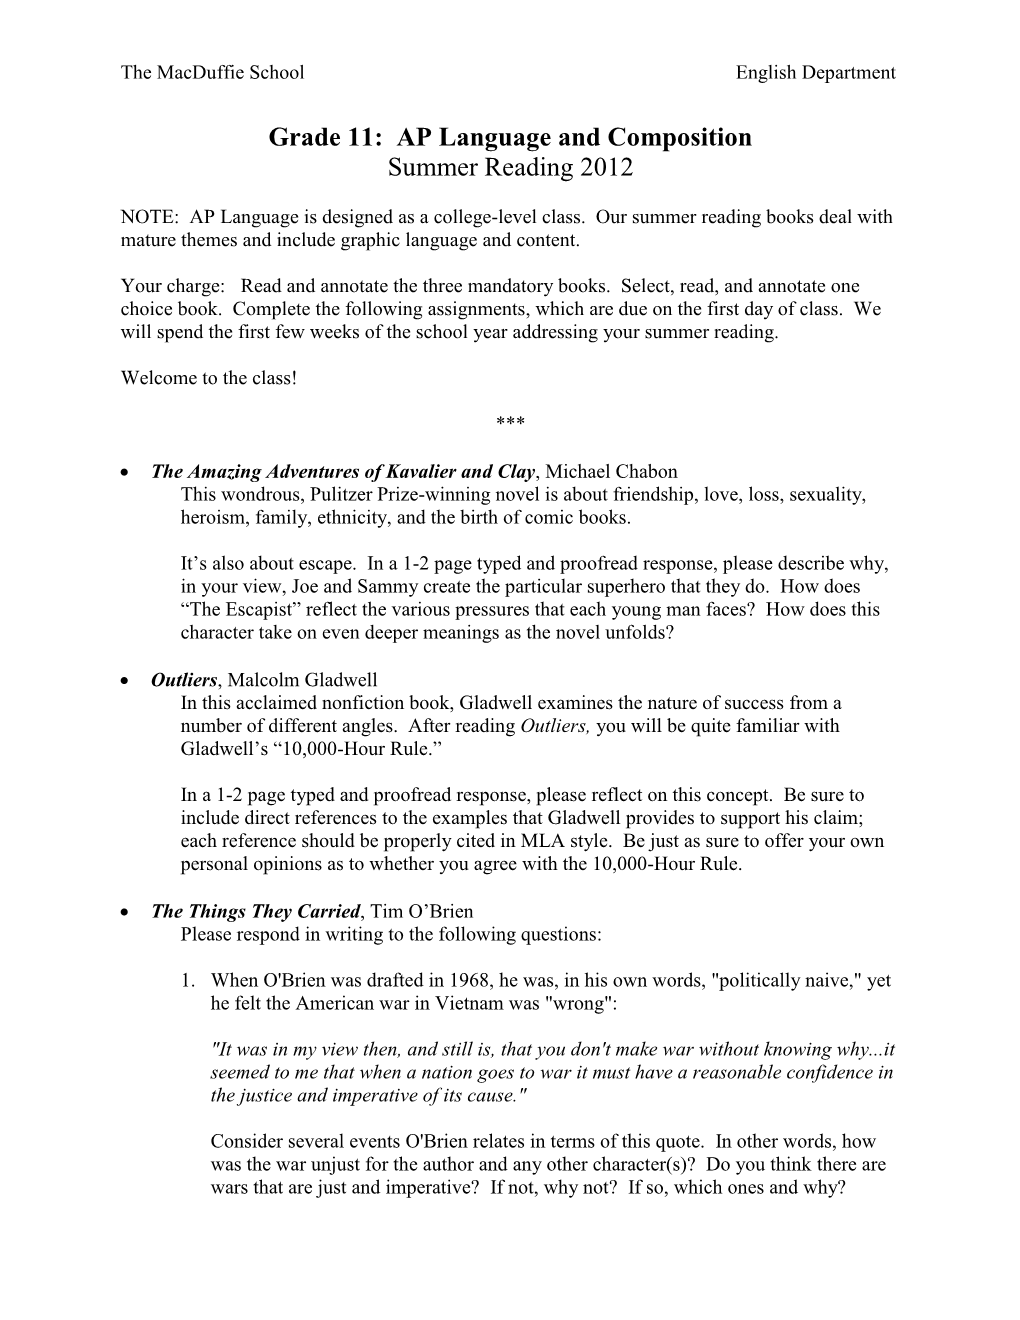 Grade 11: AP Language and Composition Summer Reading 2012